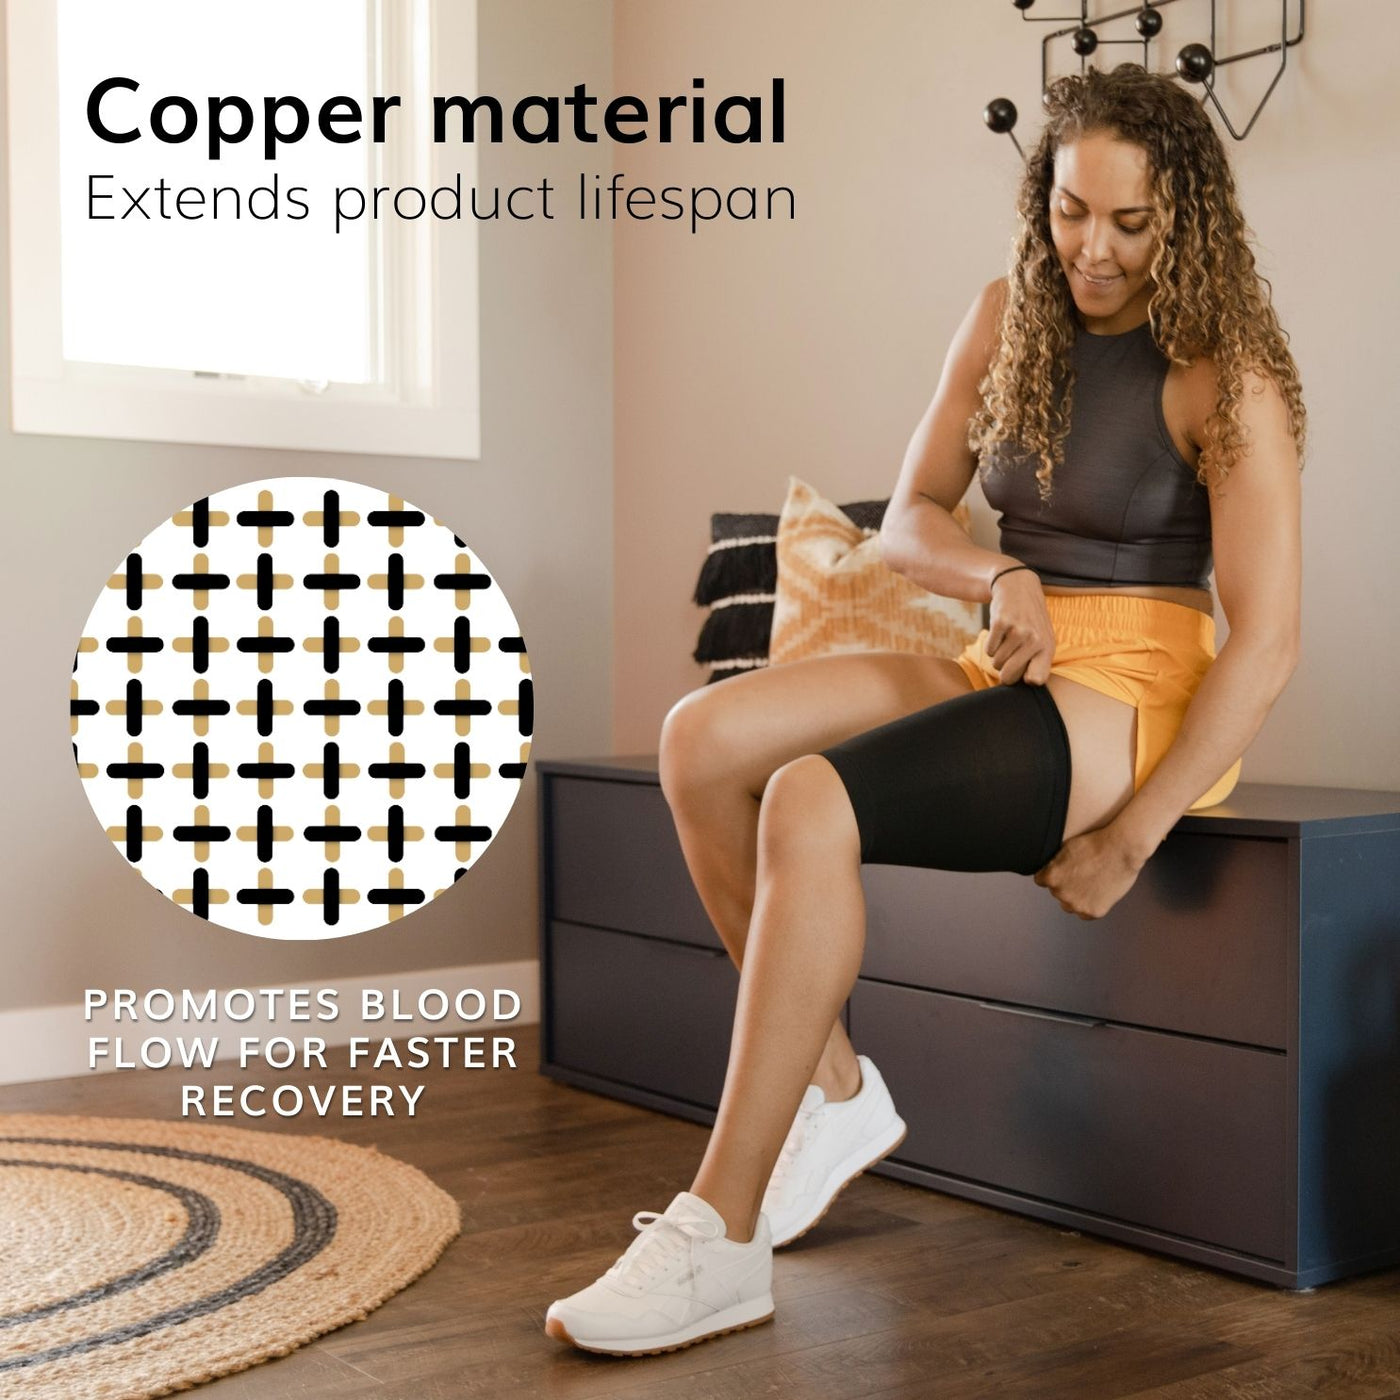 Our thigh sleeve is made with copper infused nylon to help reduce odor while recovering from a hamstring strain